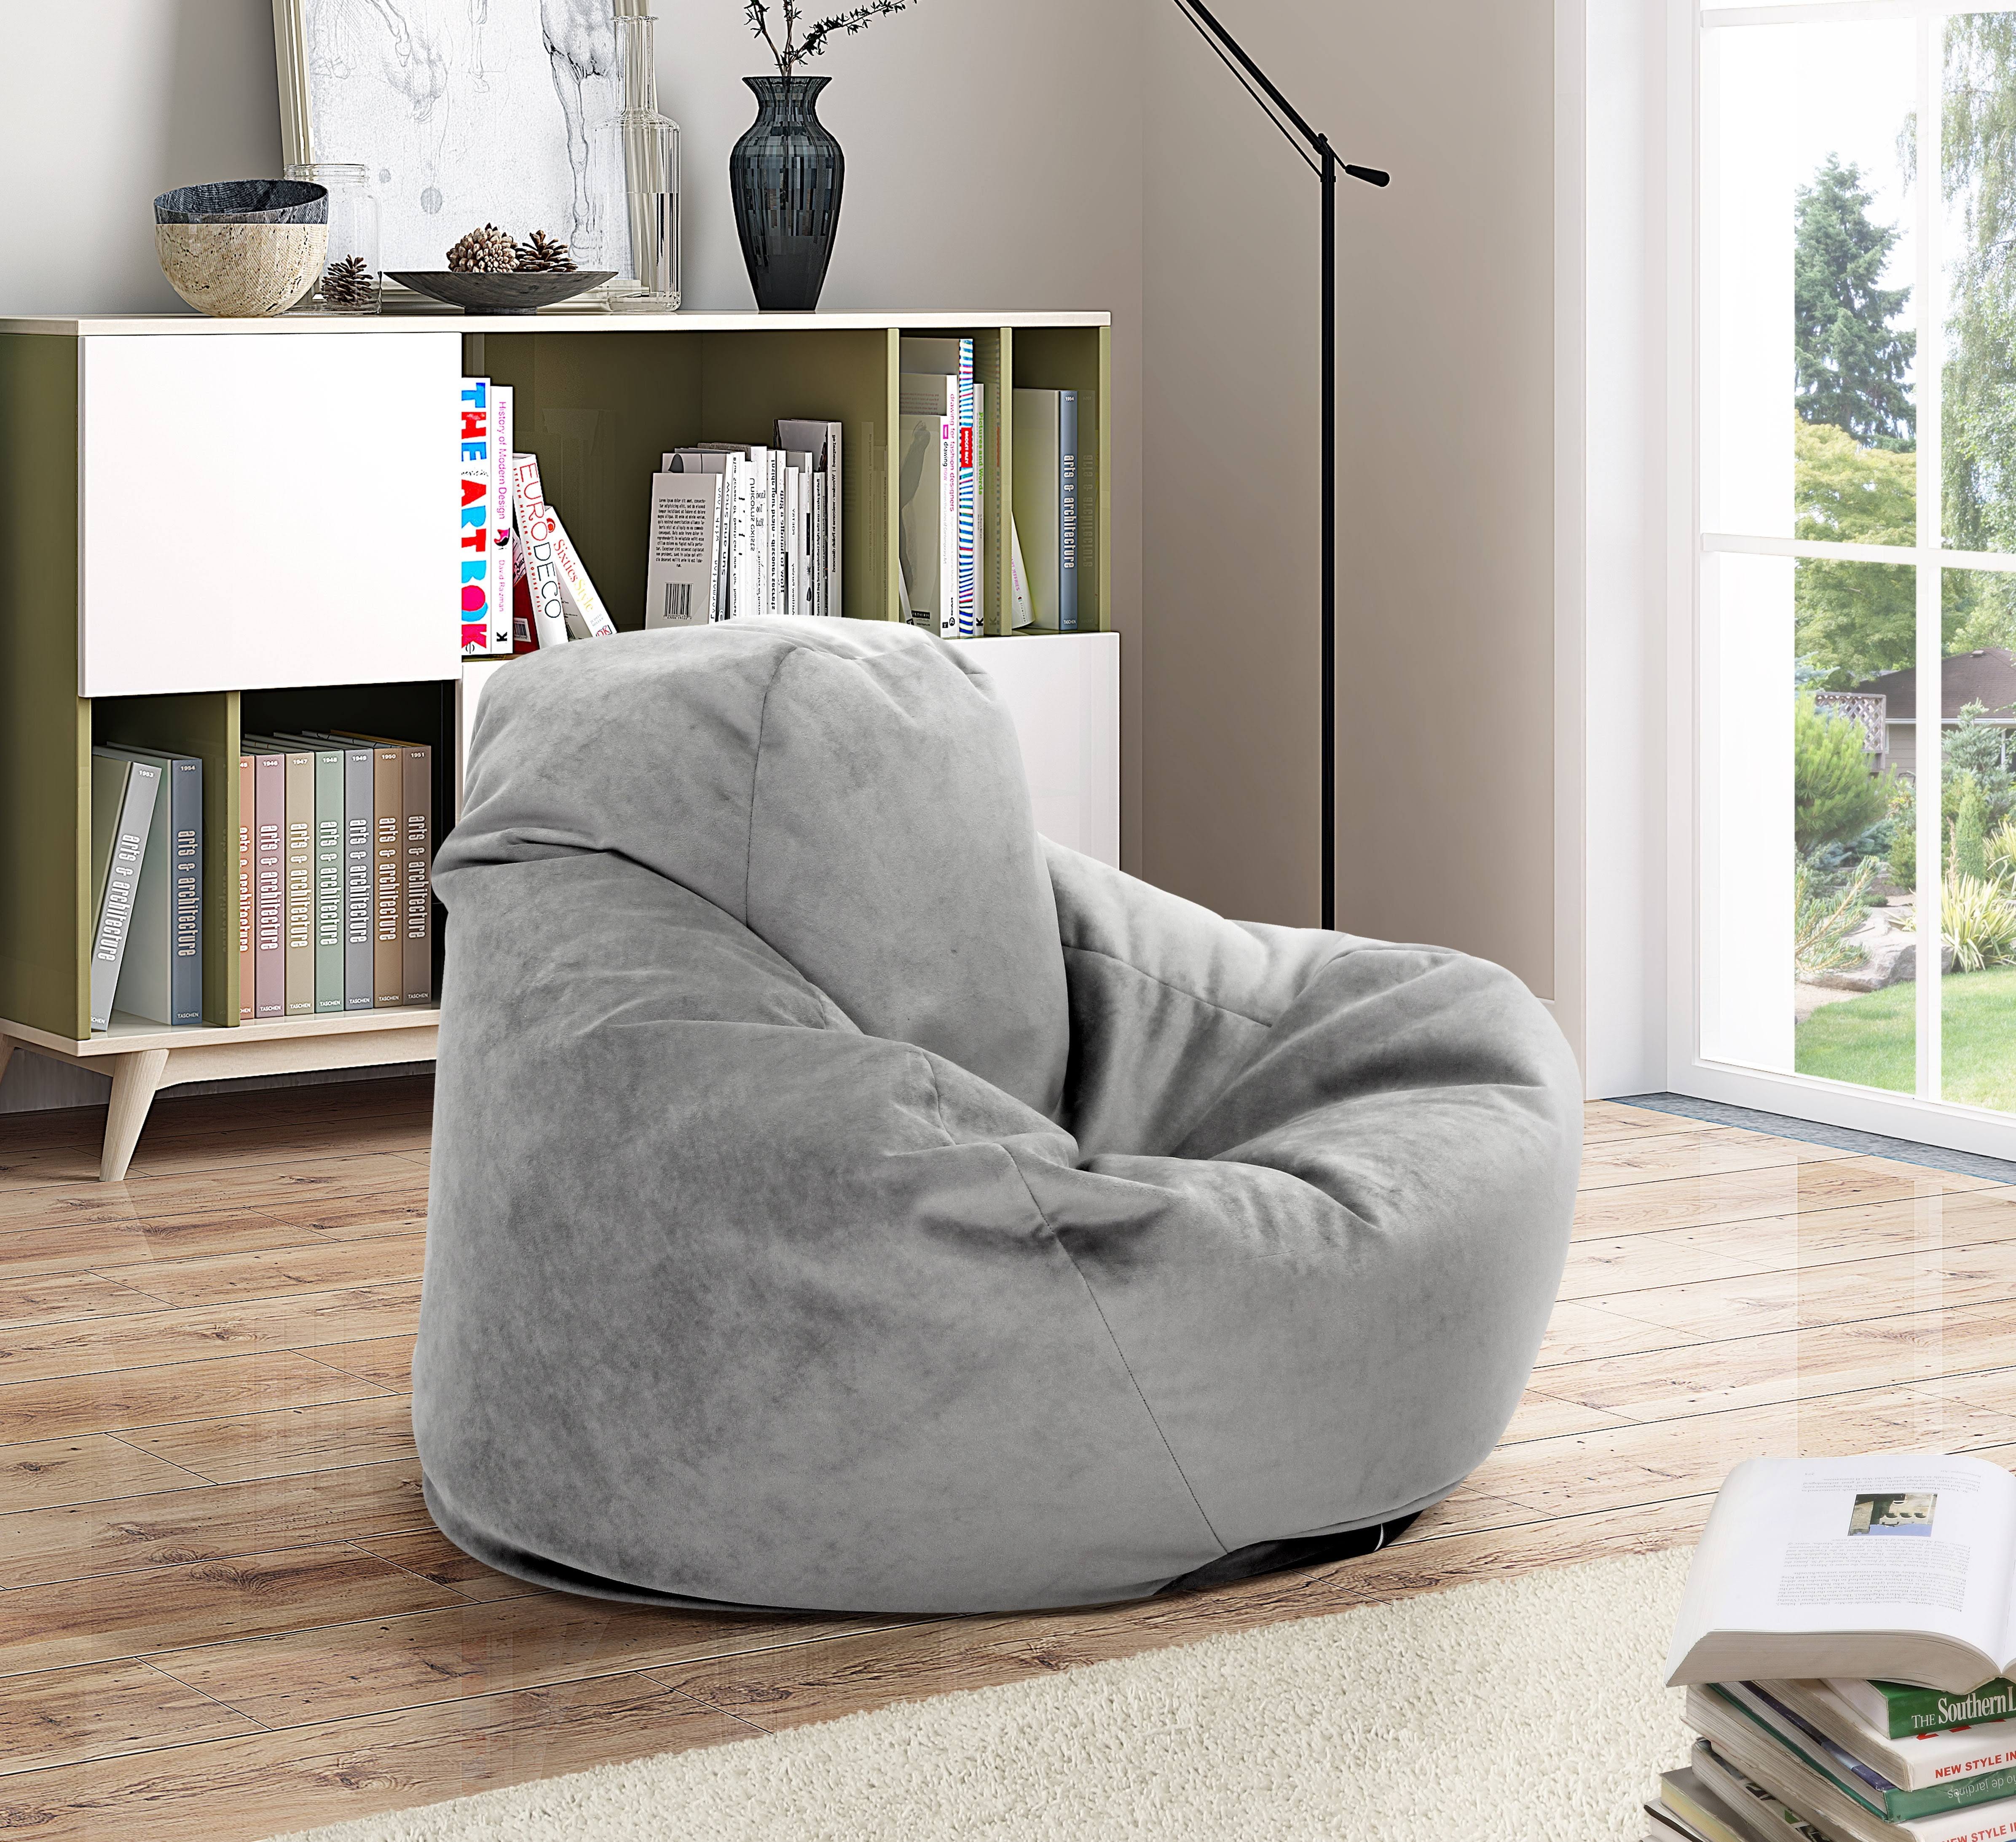 Comfortable Storm Bean Bag Chair for Style and Relaxation | Image